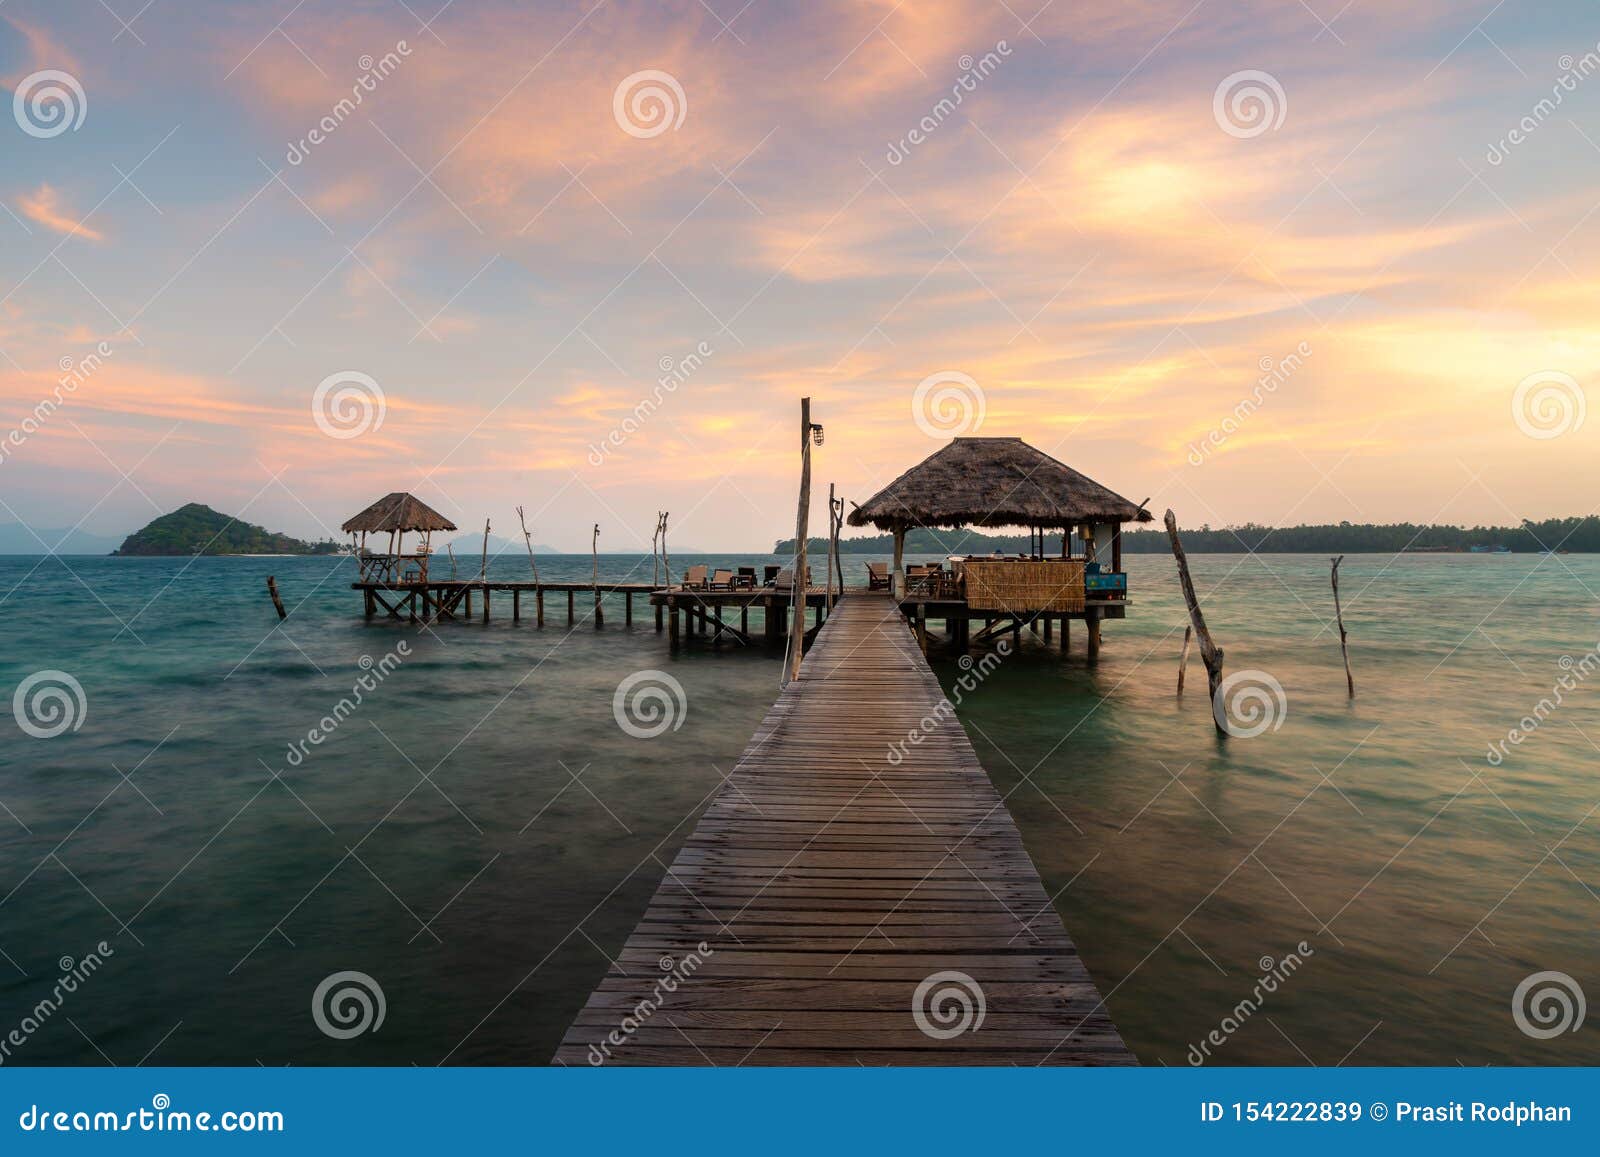 wooden bar in sea and hut with dramatic sunset sky in koh mak at trat, thailand. summer, travel, vacation and holiday concept